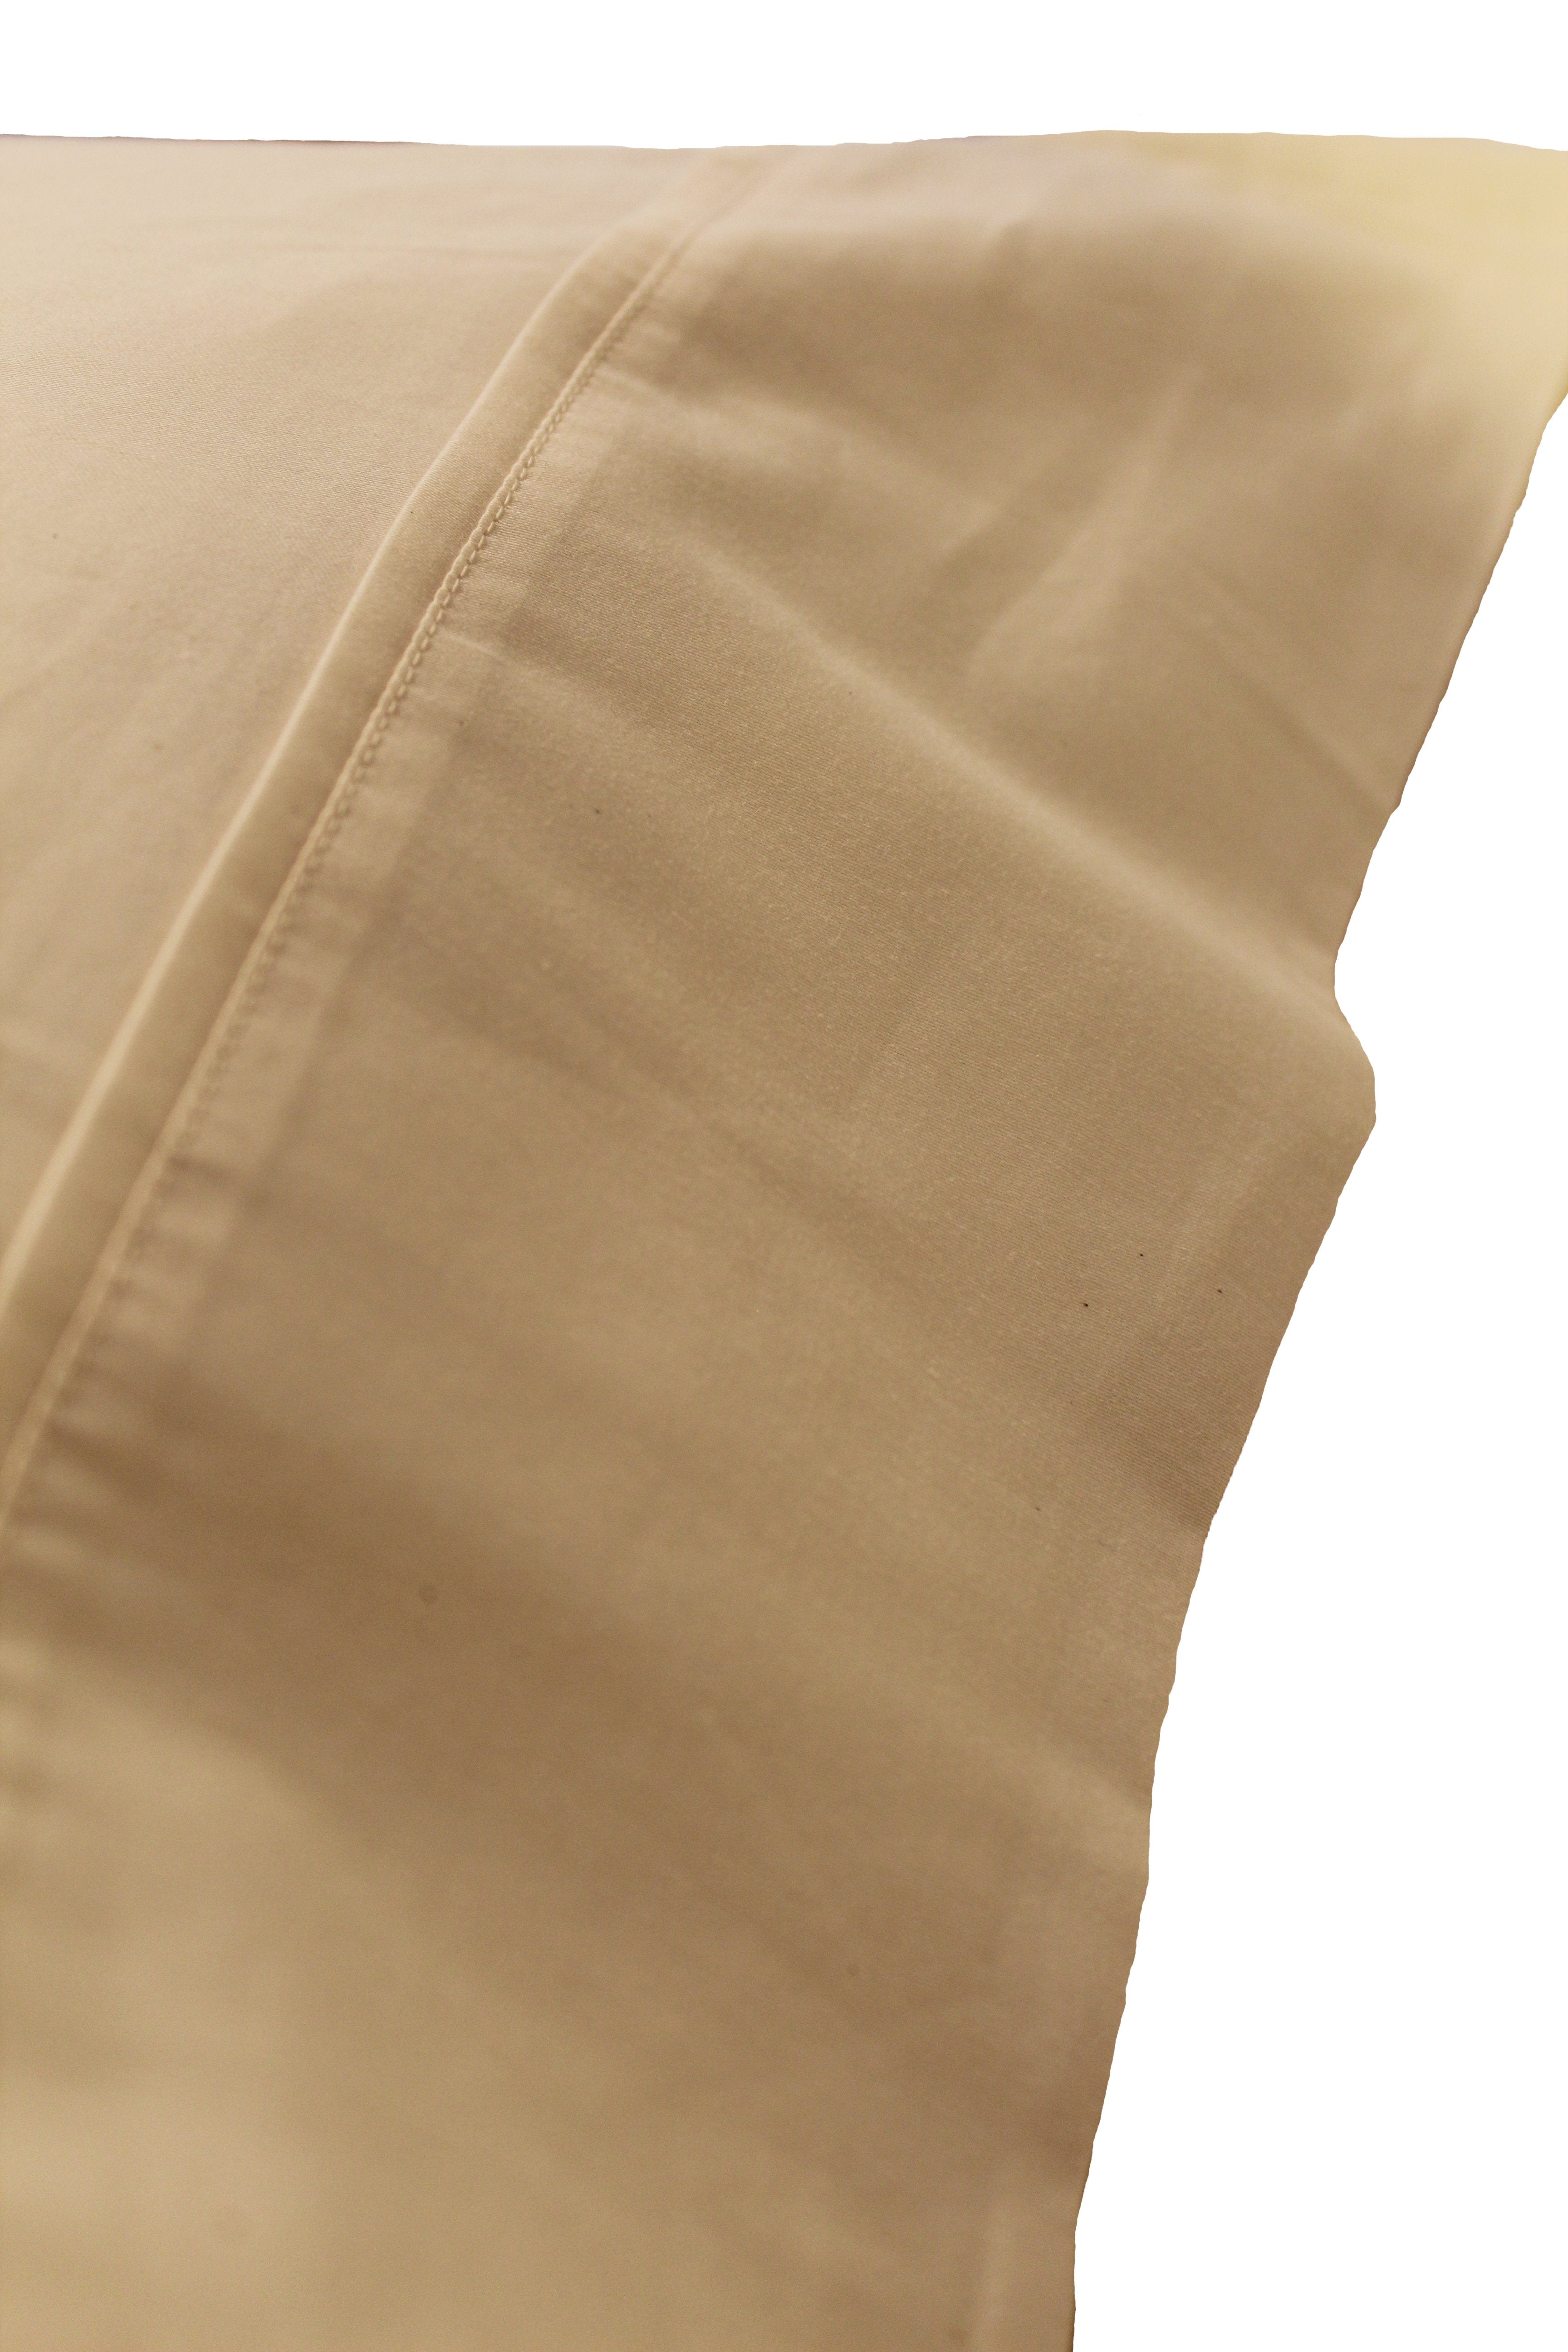 Organic 400-thread count pillowcases is made by 100% organic cotton that breathes naturally so your body temperature stays comfortable while you sleep.